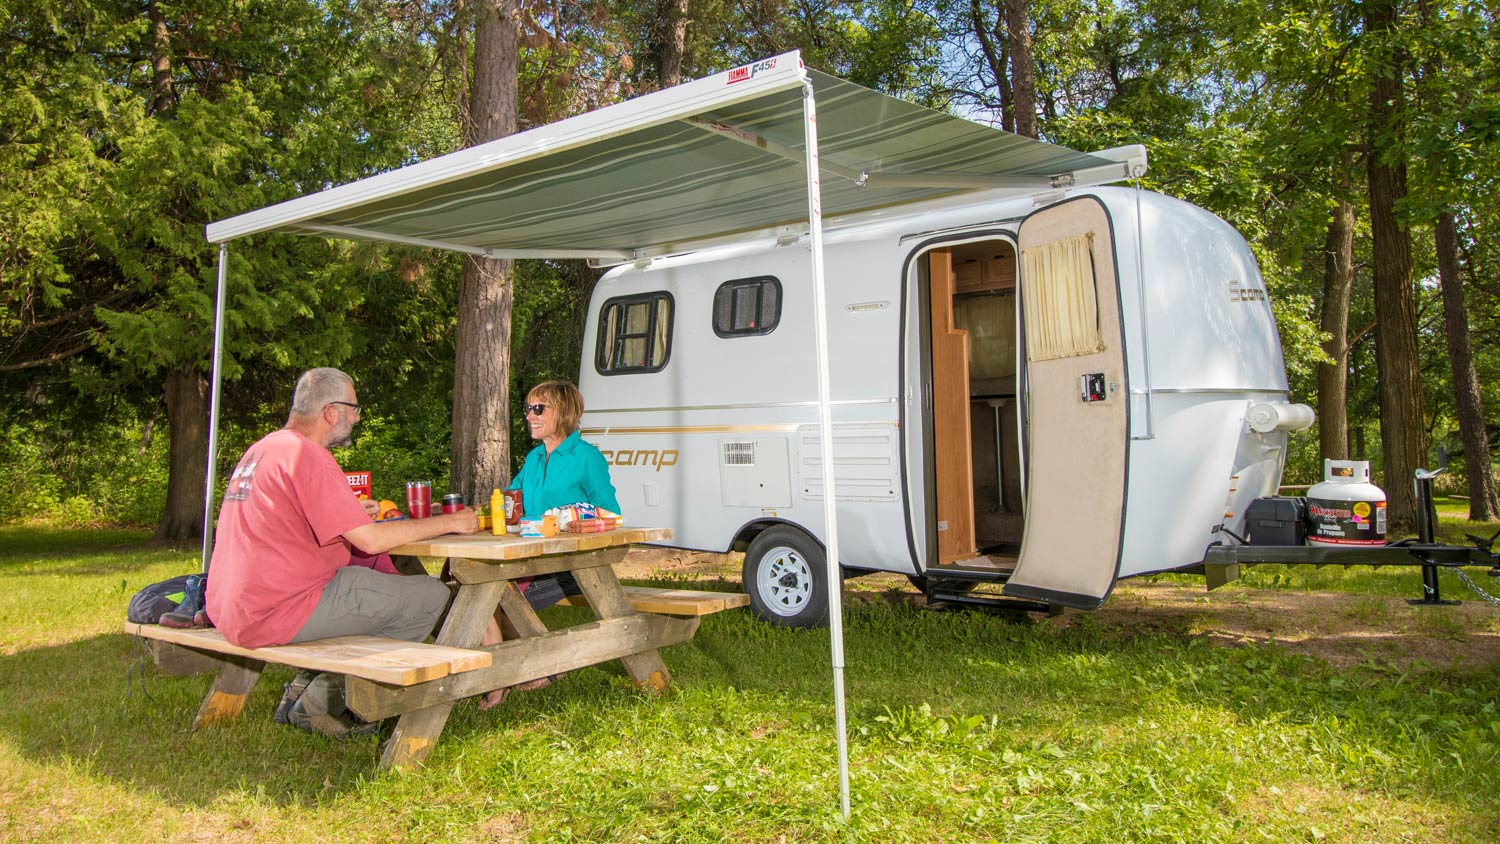 A Scamp Camper is a small, lightweight fiberglass travel trailer with a 50-...